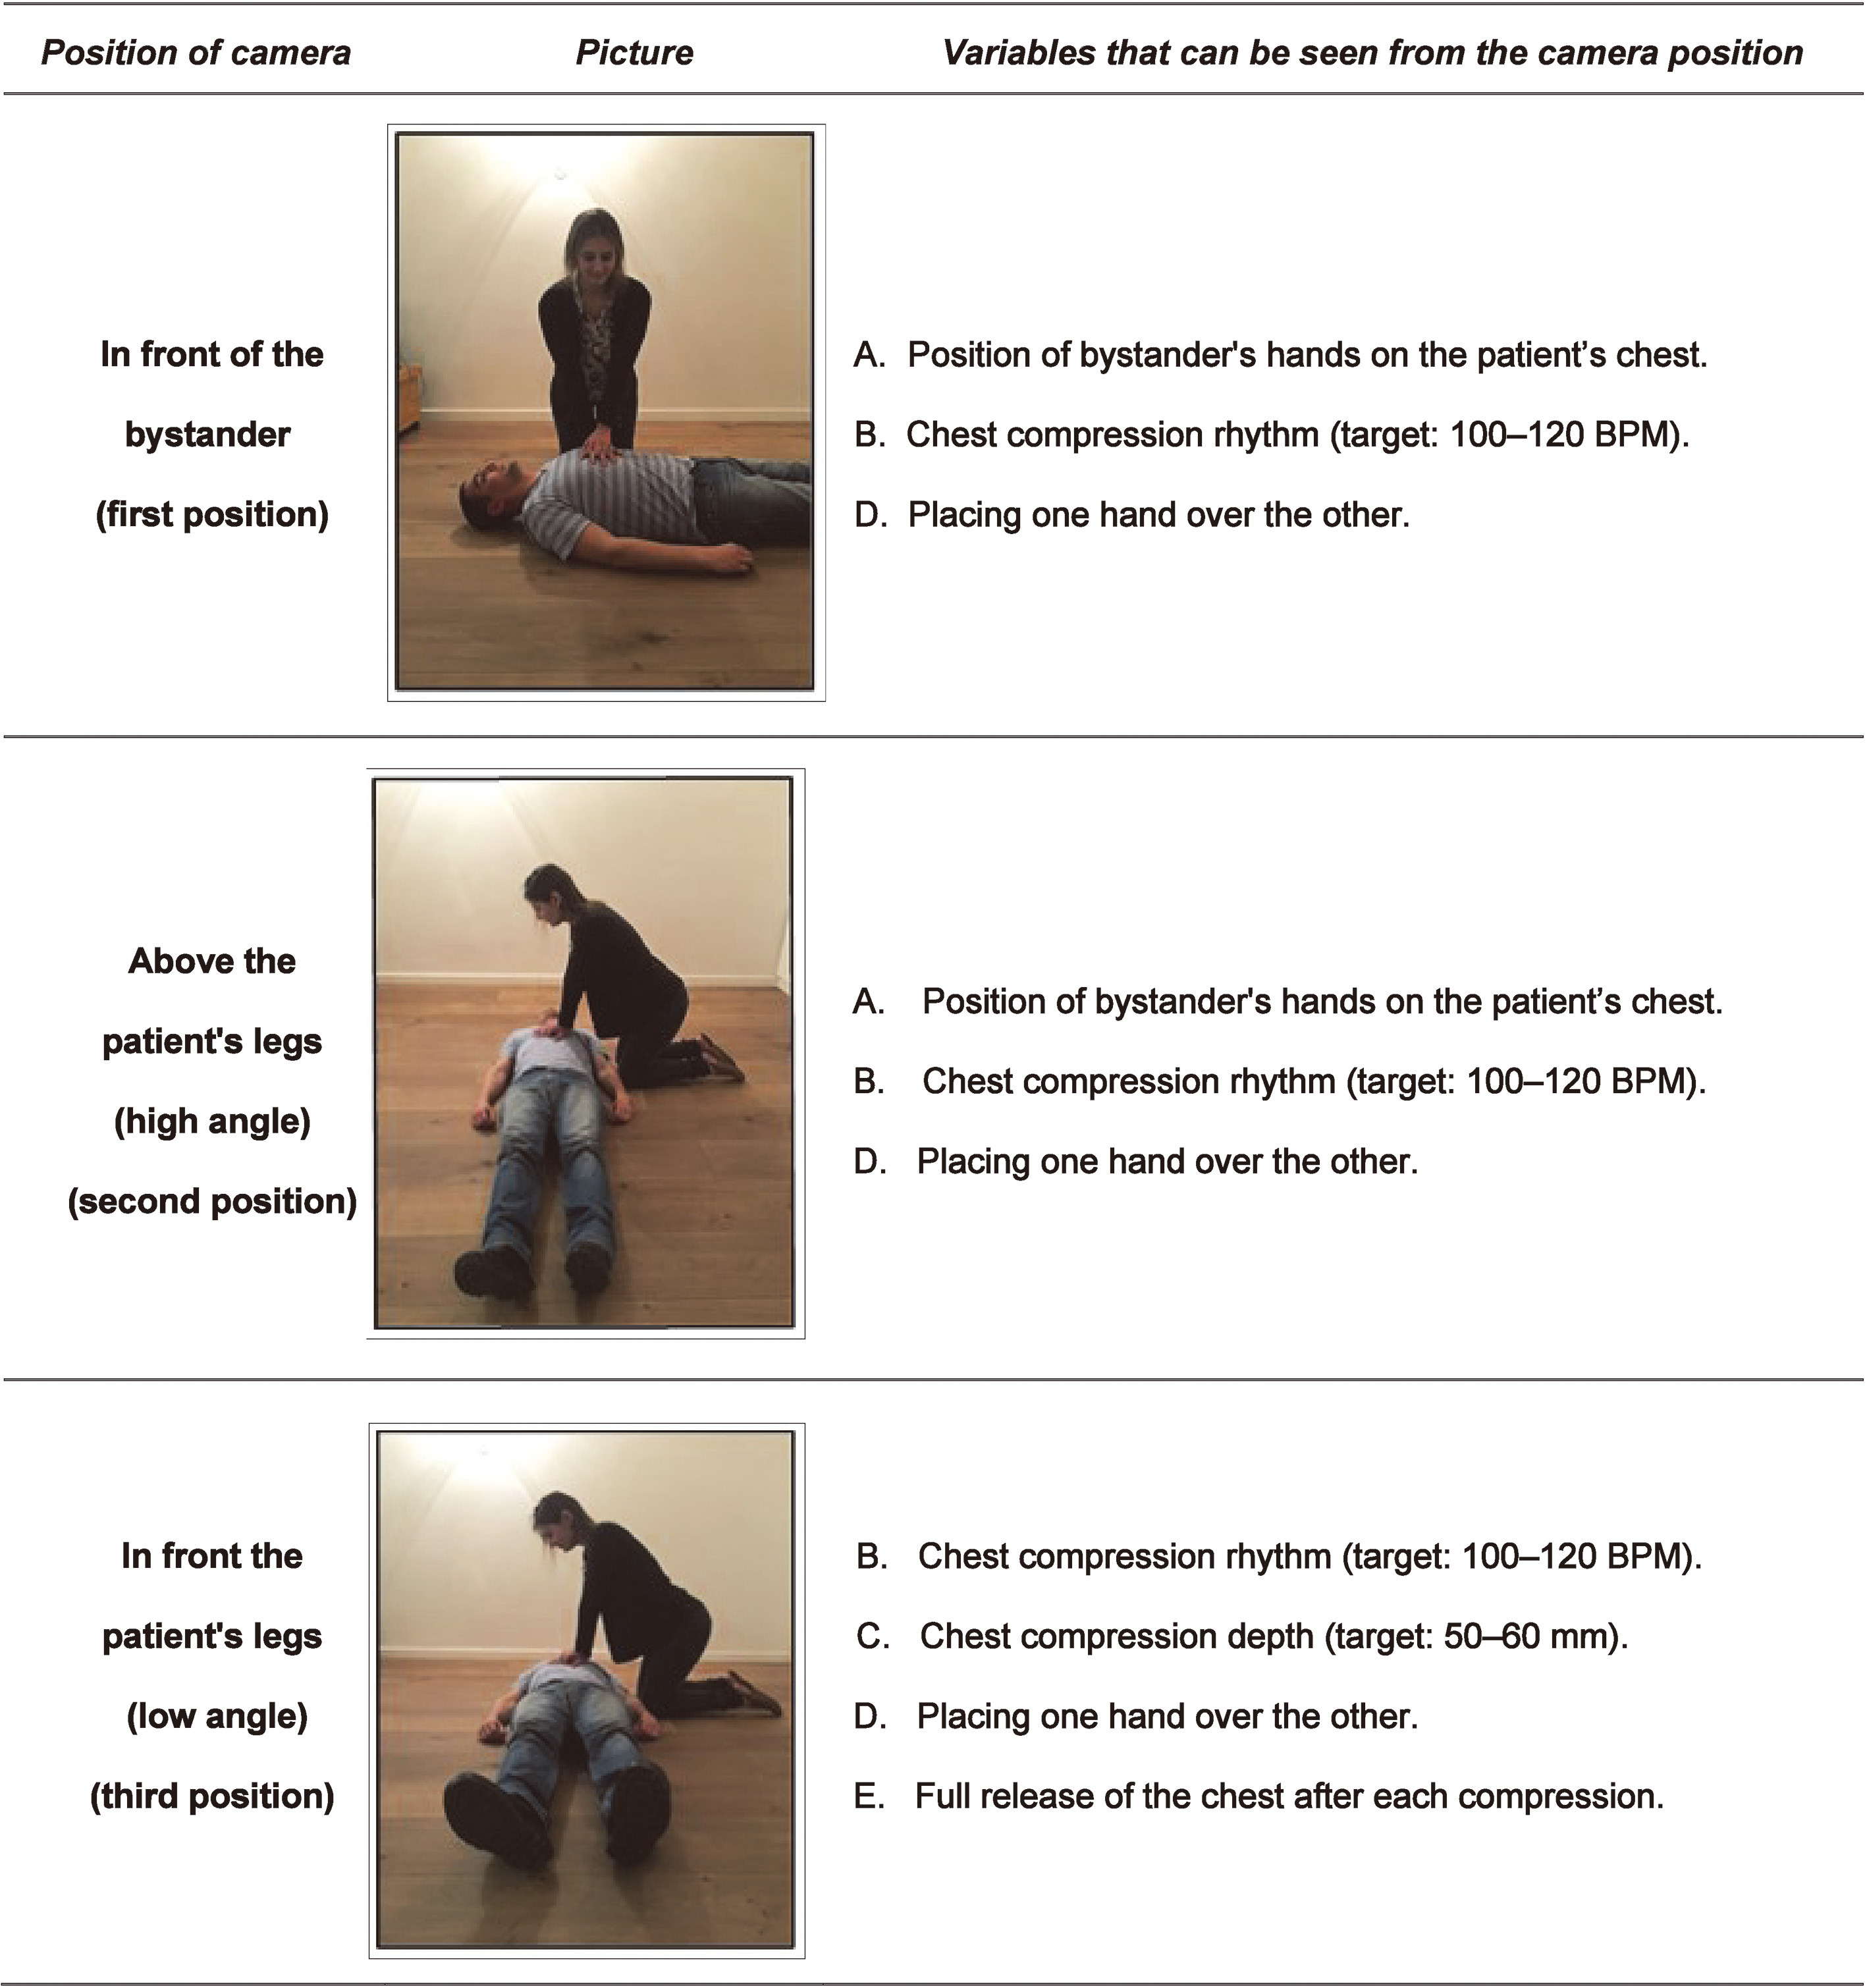 Camera positions for the video-instructed CPR with filming protocol.